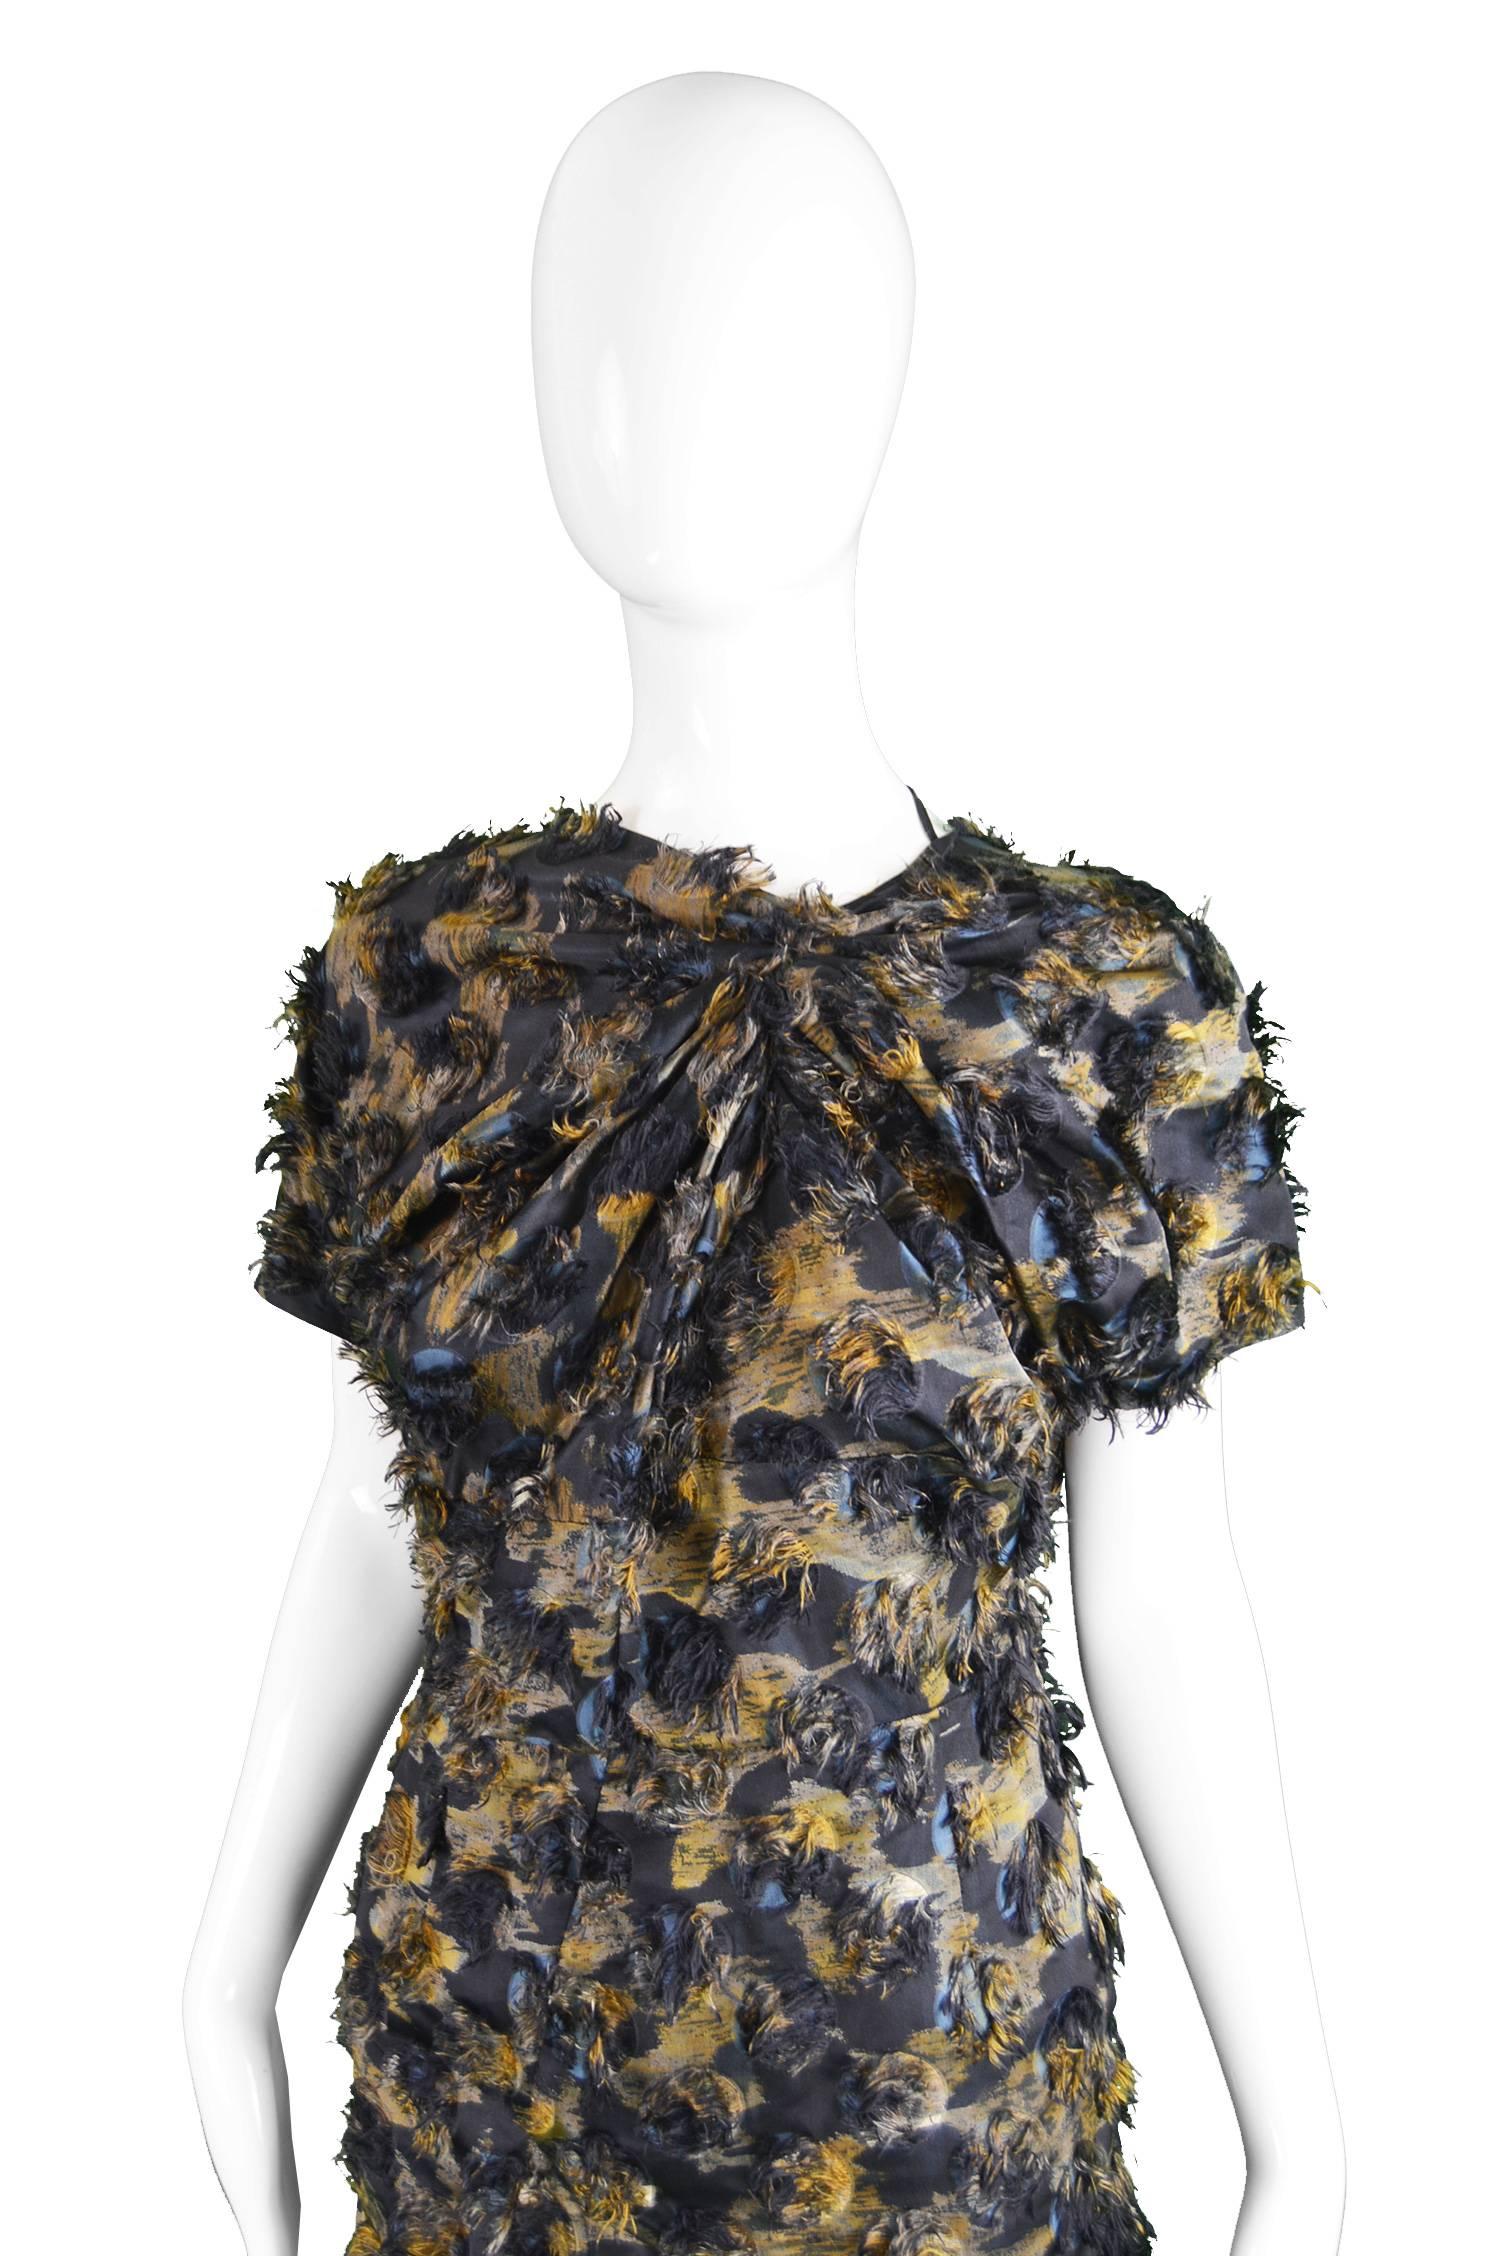 Marni Fuzzy Textured Gathered Silk Short Sleeve Party Dress, A/W 2010 In Excellent Condition For Sale In Doncaster, South Yorkshire